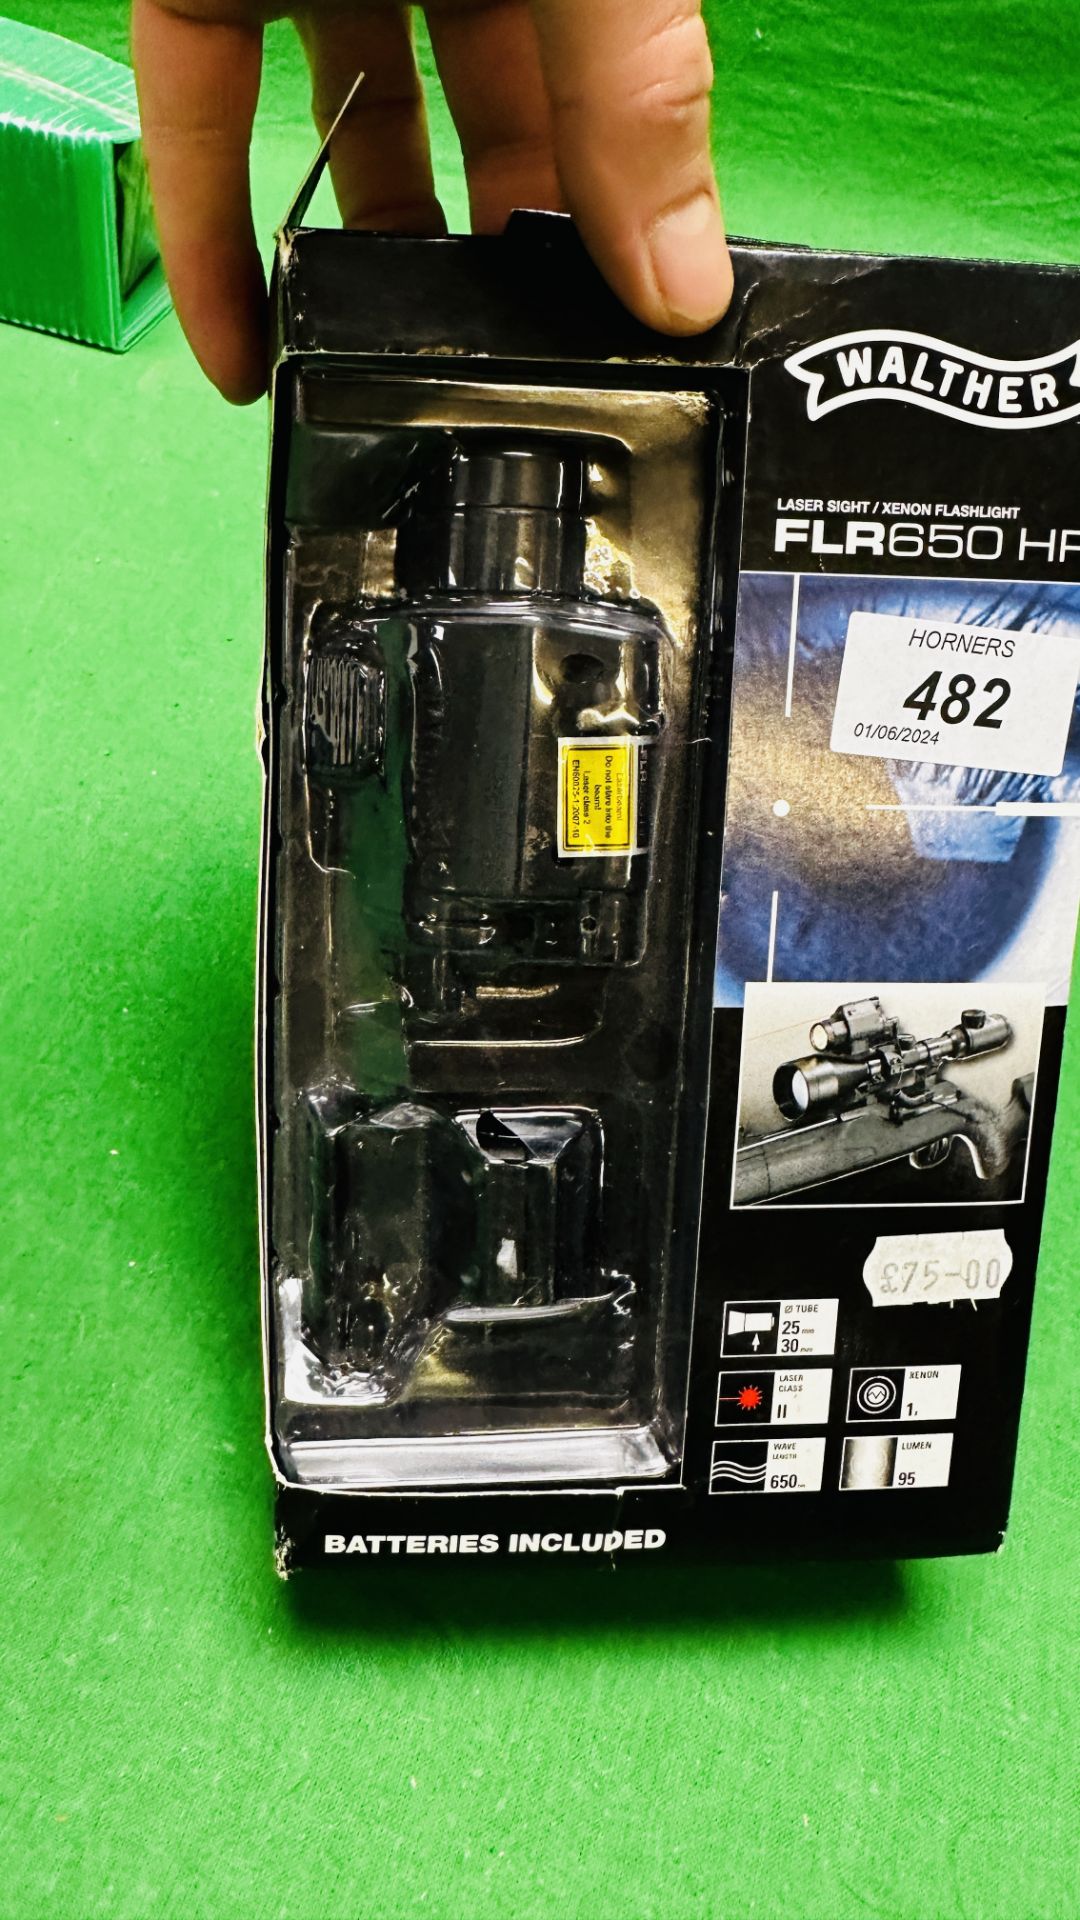 A BOXED WALTHER FLR650HP LASER SIGHT/XEON FLASHLIGHT - Image 4 of 5